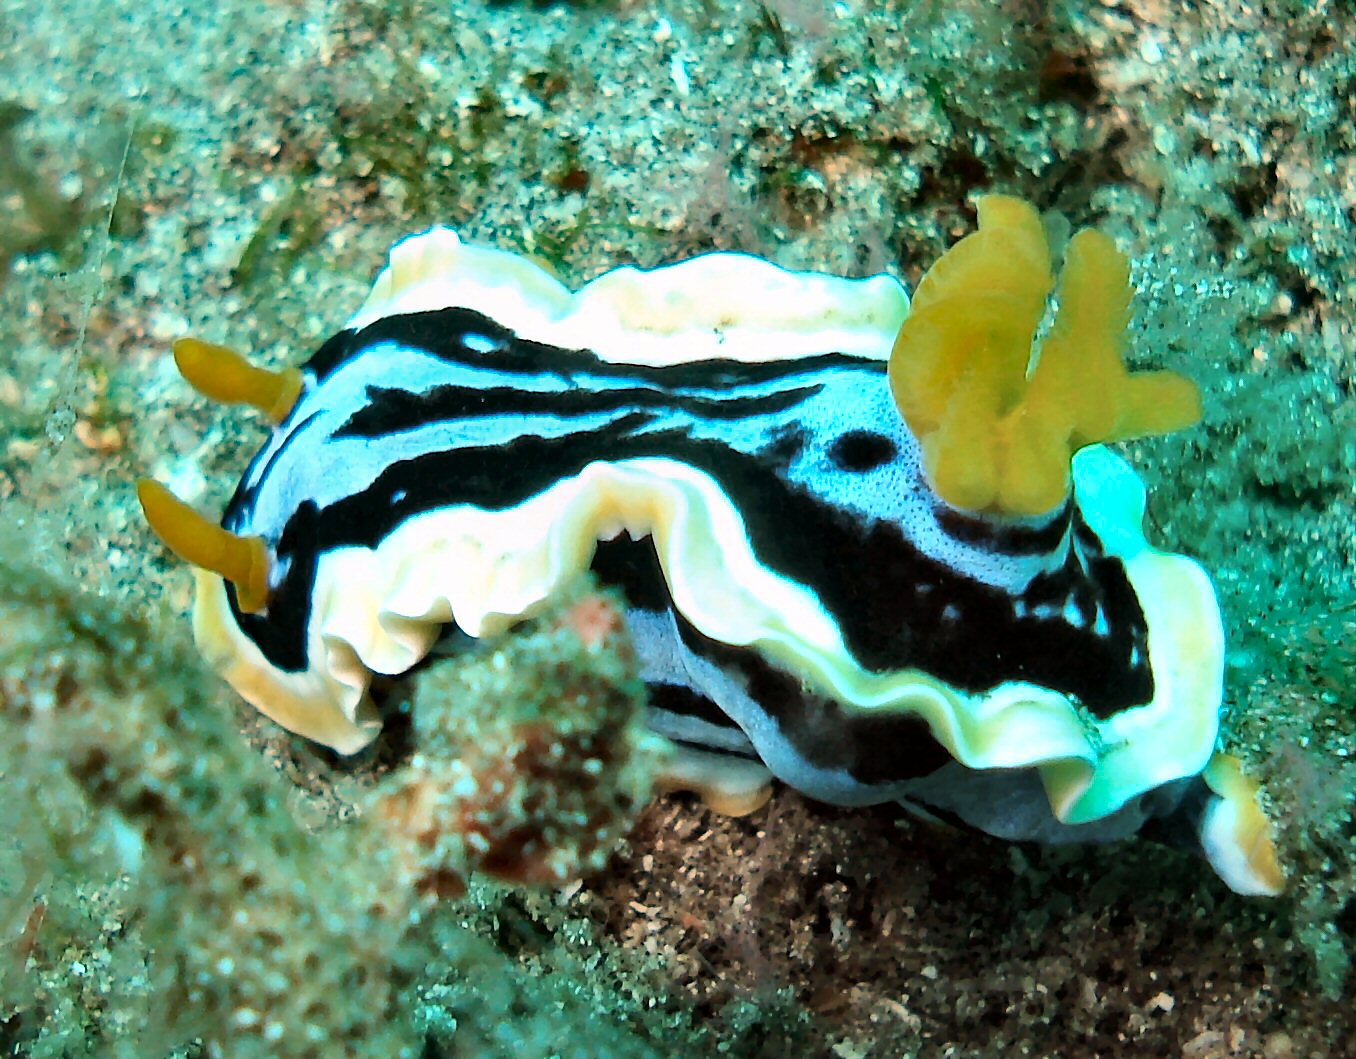 Not sure which nudibranch this is